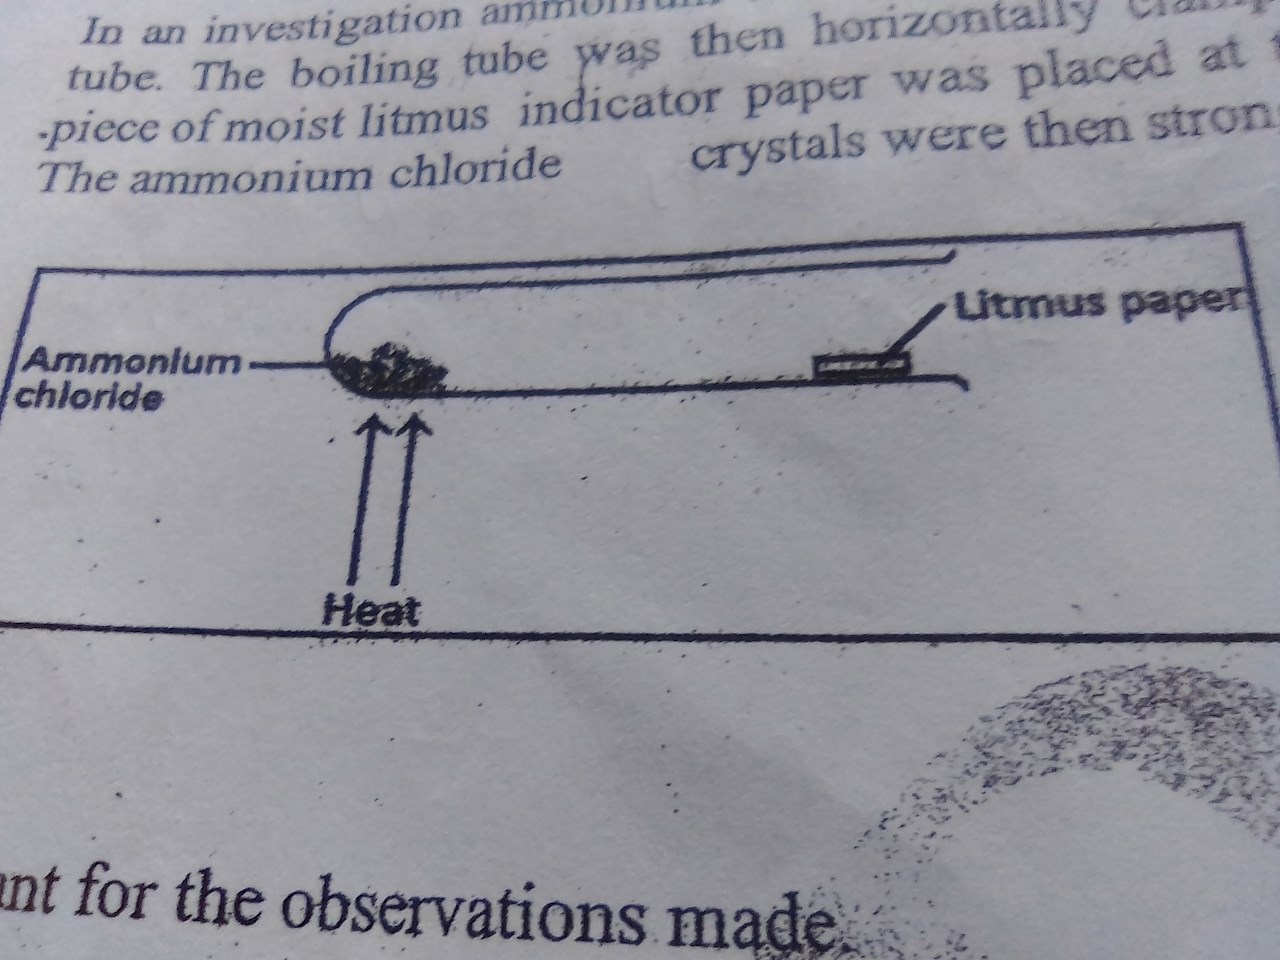 In an investigation ammonium chloride crystals were placed inside a boiling tube ,the boiling tube was then horizontally clamped as shown below?